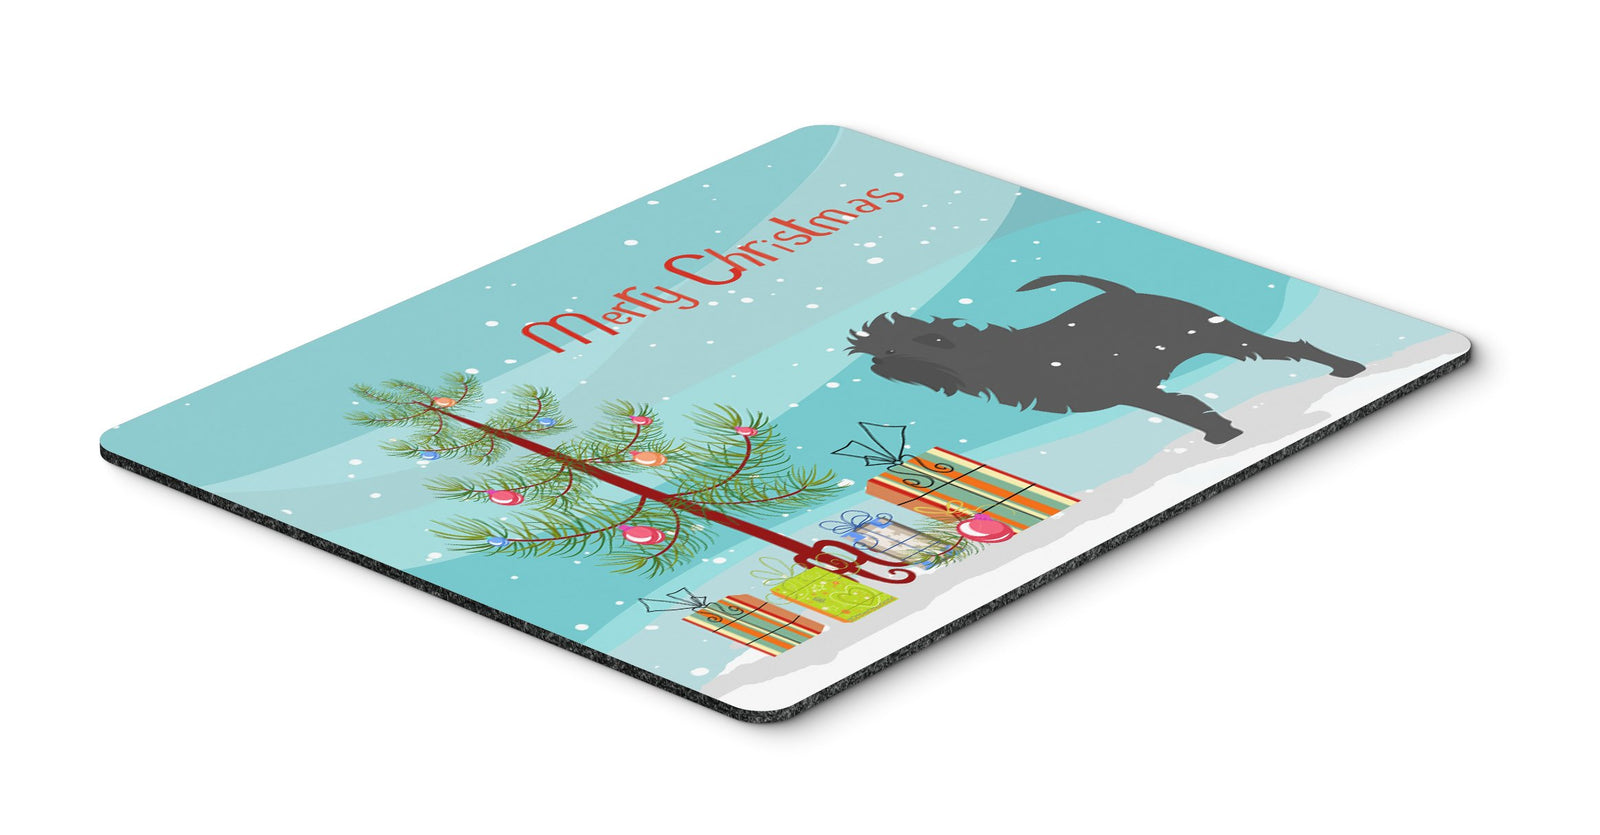 Affenpinscher Merry Christmas Tree Mouse Pad, Hot Pad or Trivet by Caroline's Treasures